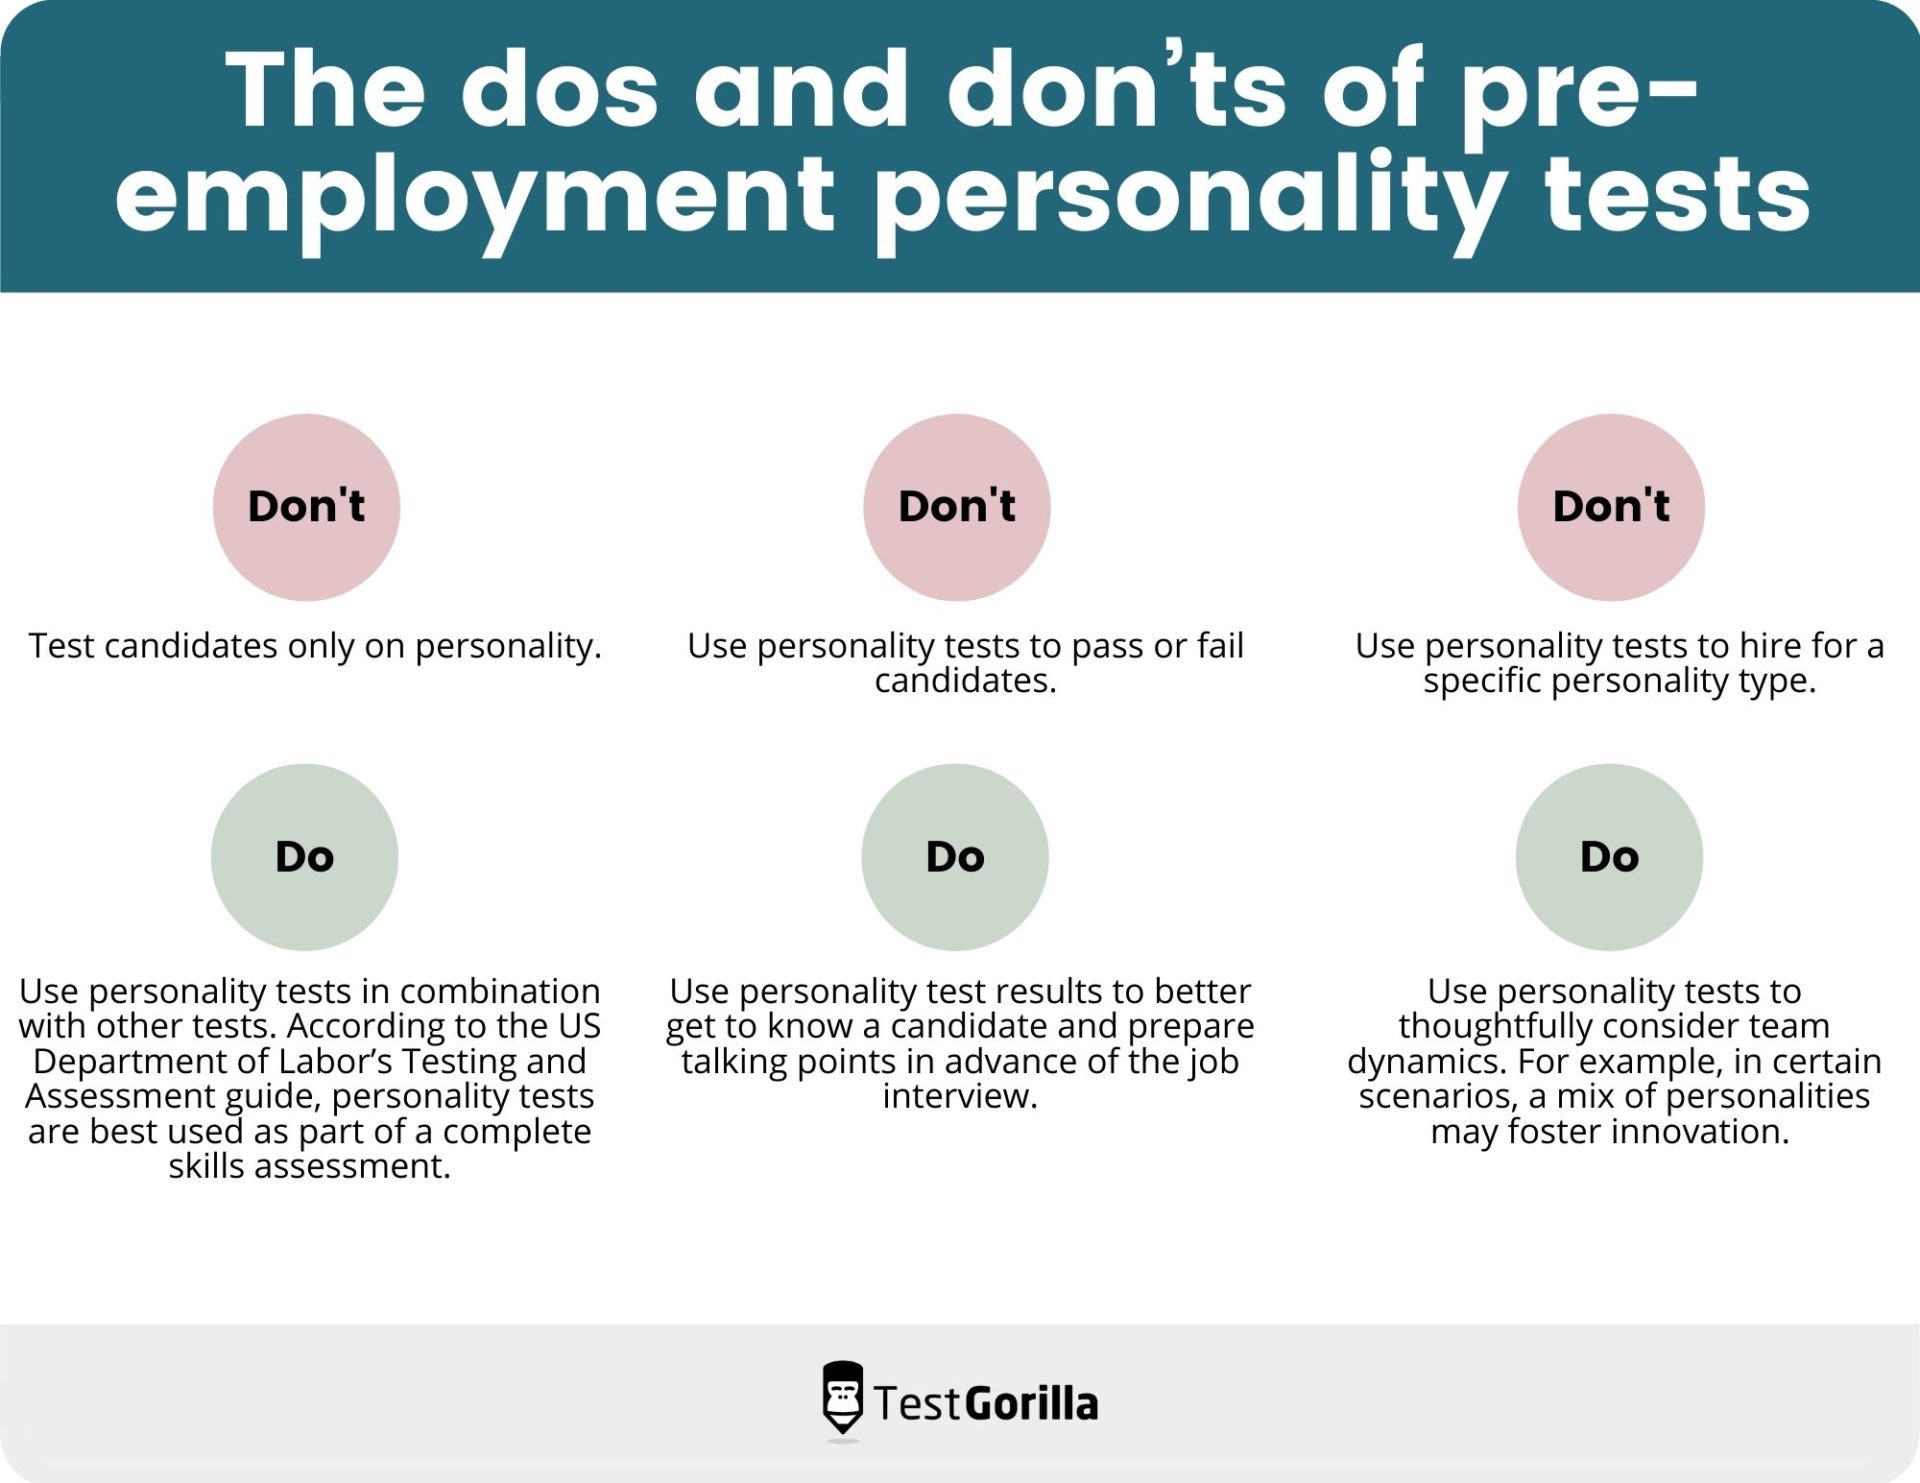 dos and donts of pre-employment tests